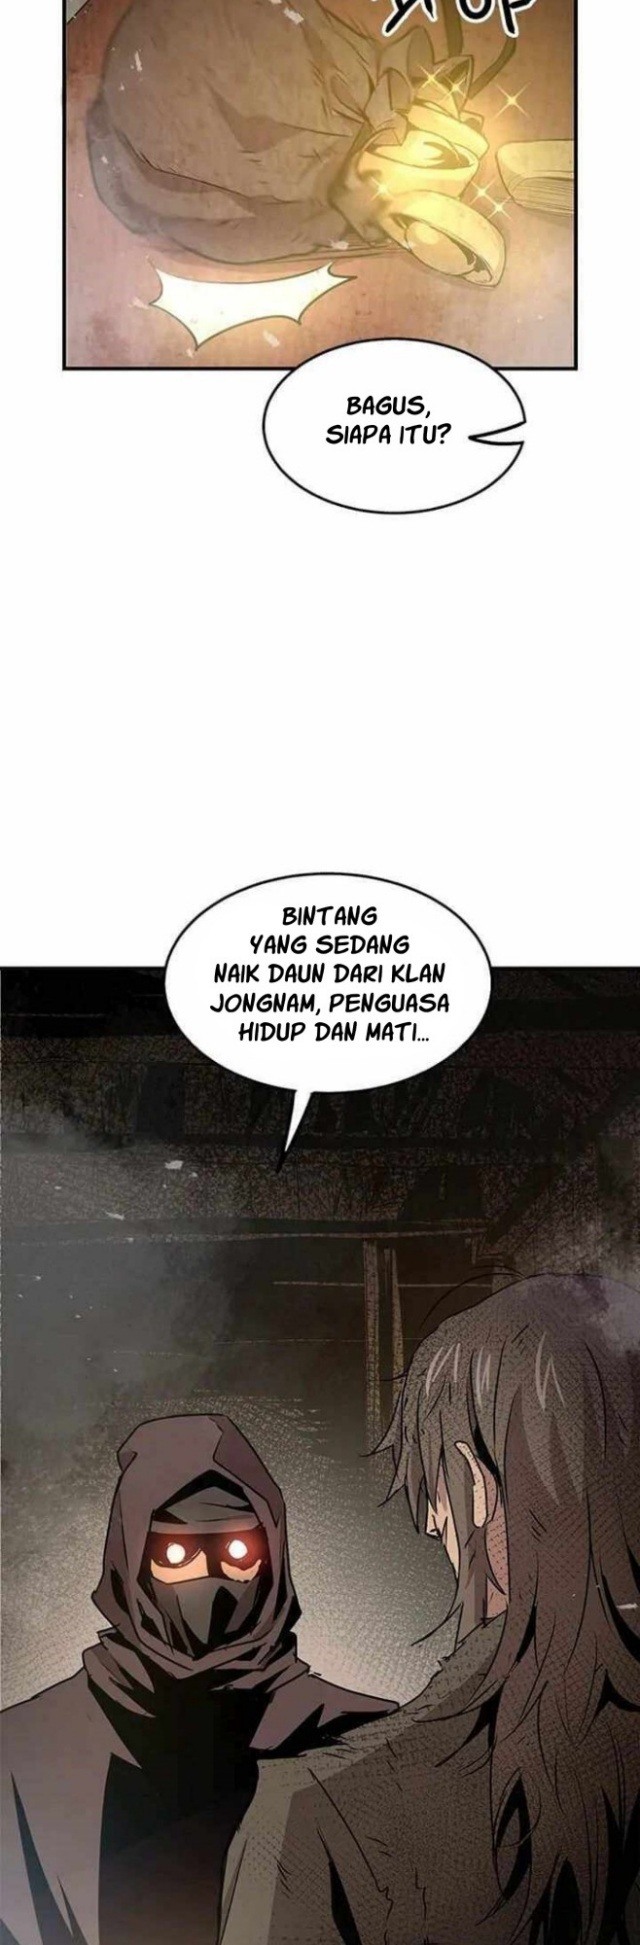 Strongest Fighter Chapter 36